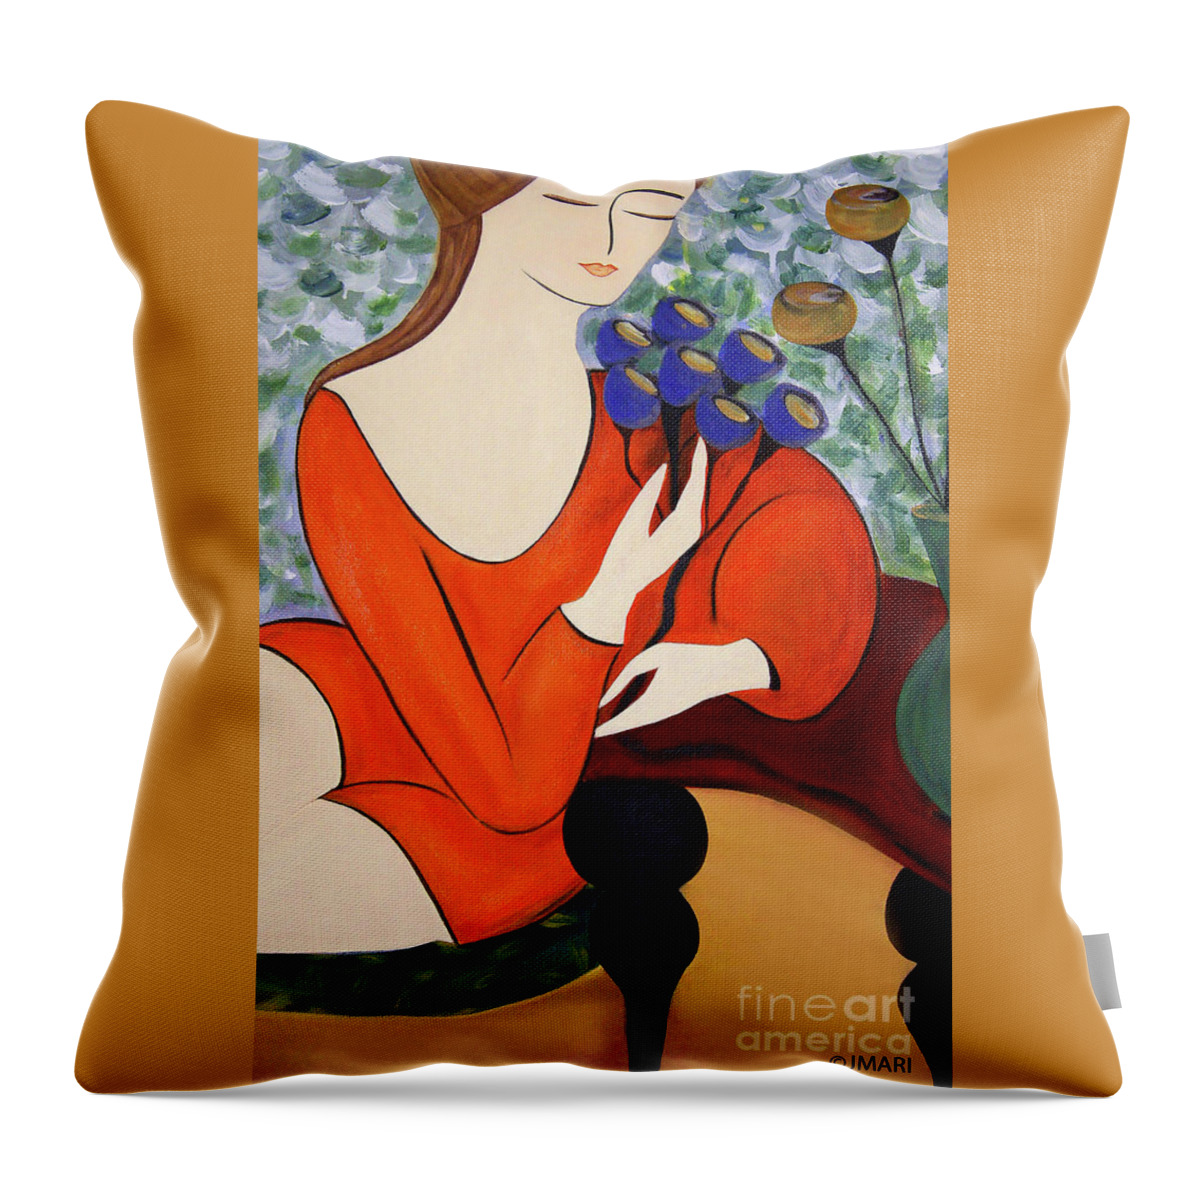 #female #figurative #floral #fineart #art #images #painting #artist #print #canvas #sittingwomen Throw Pillow featuring the painting Sitting Women by Jacquelinemari